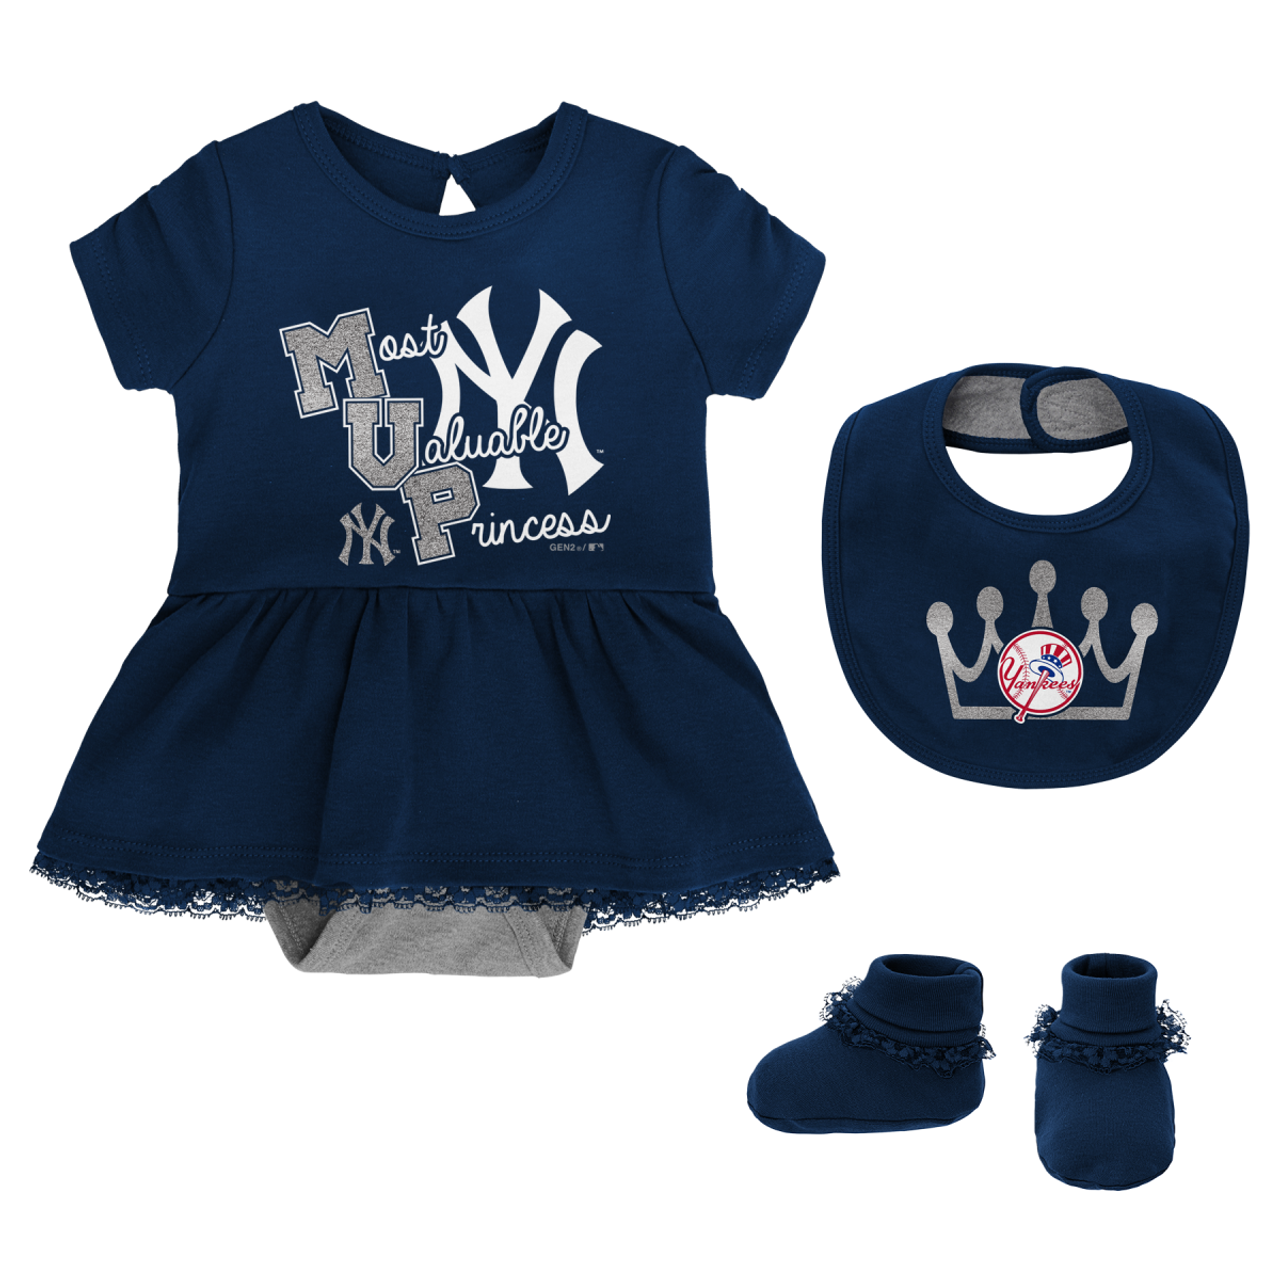 yankees newborn outfit